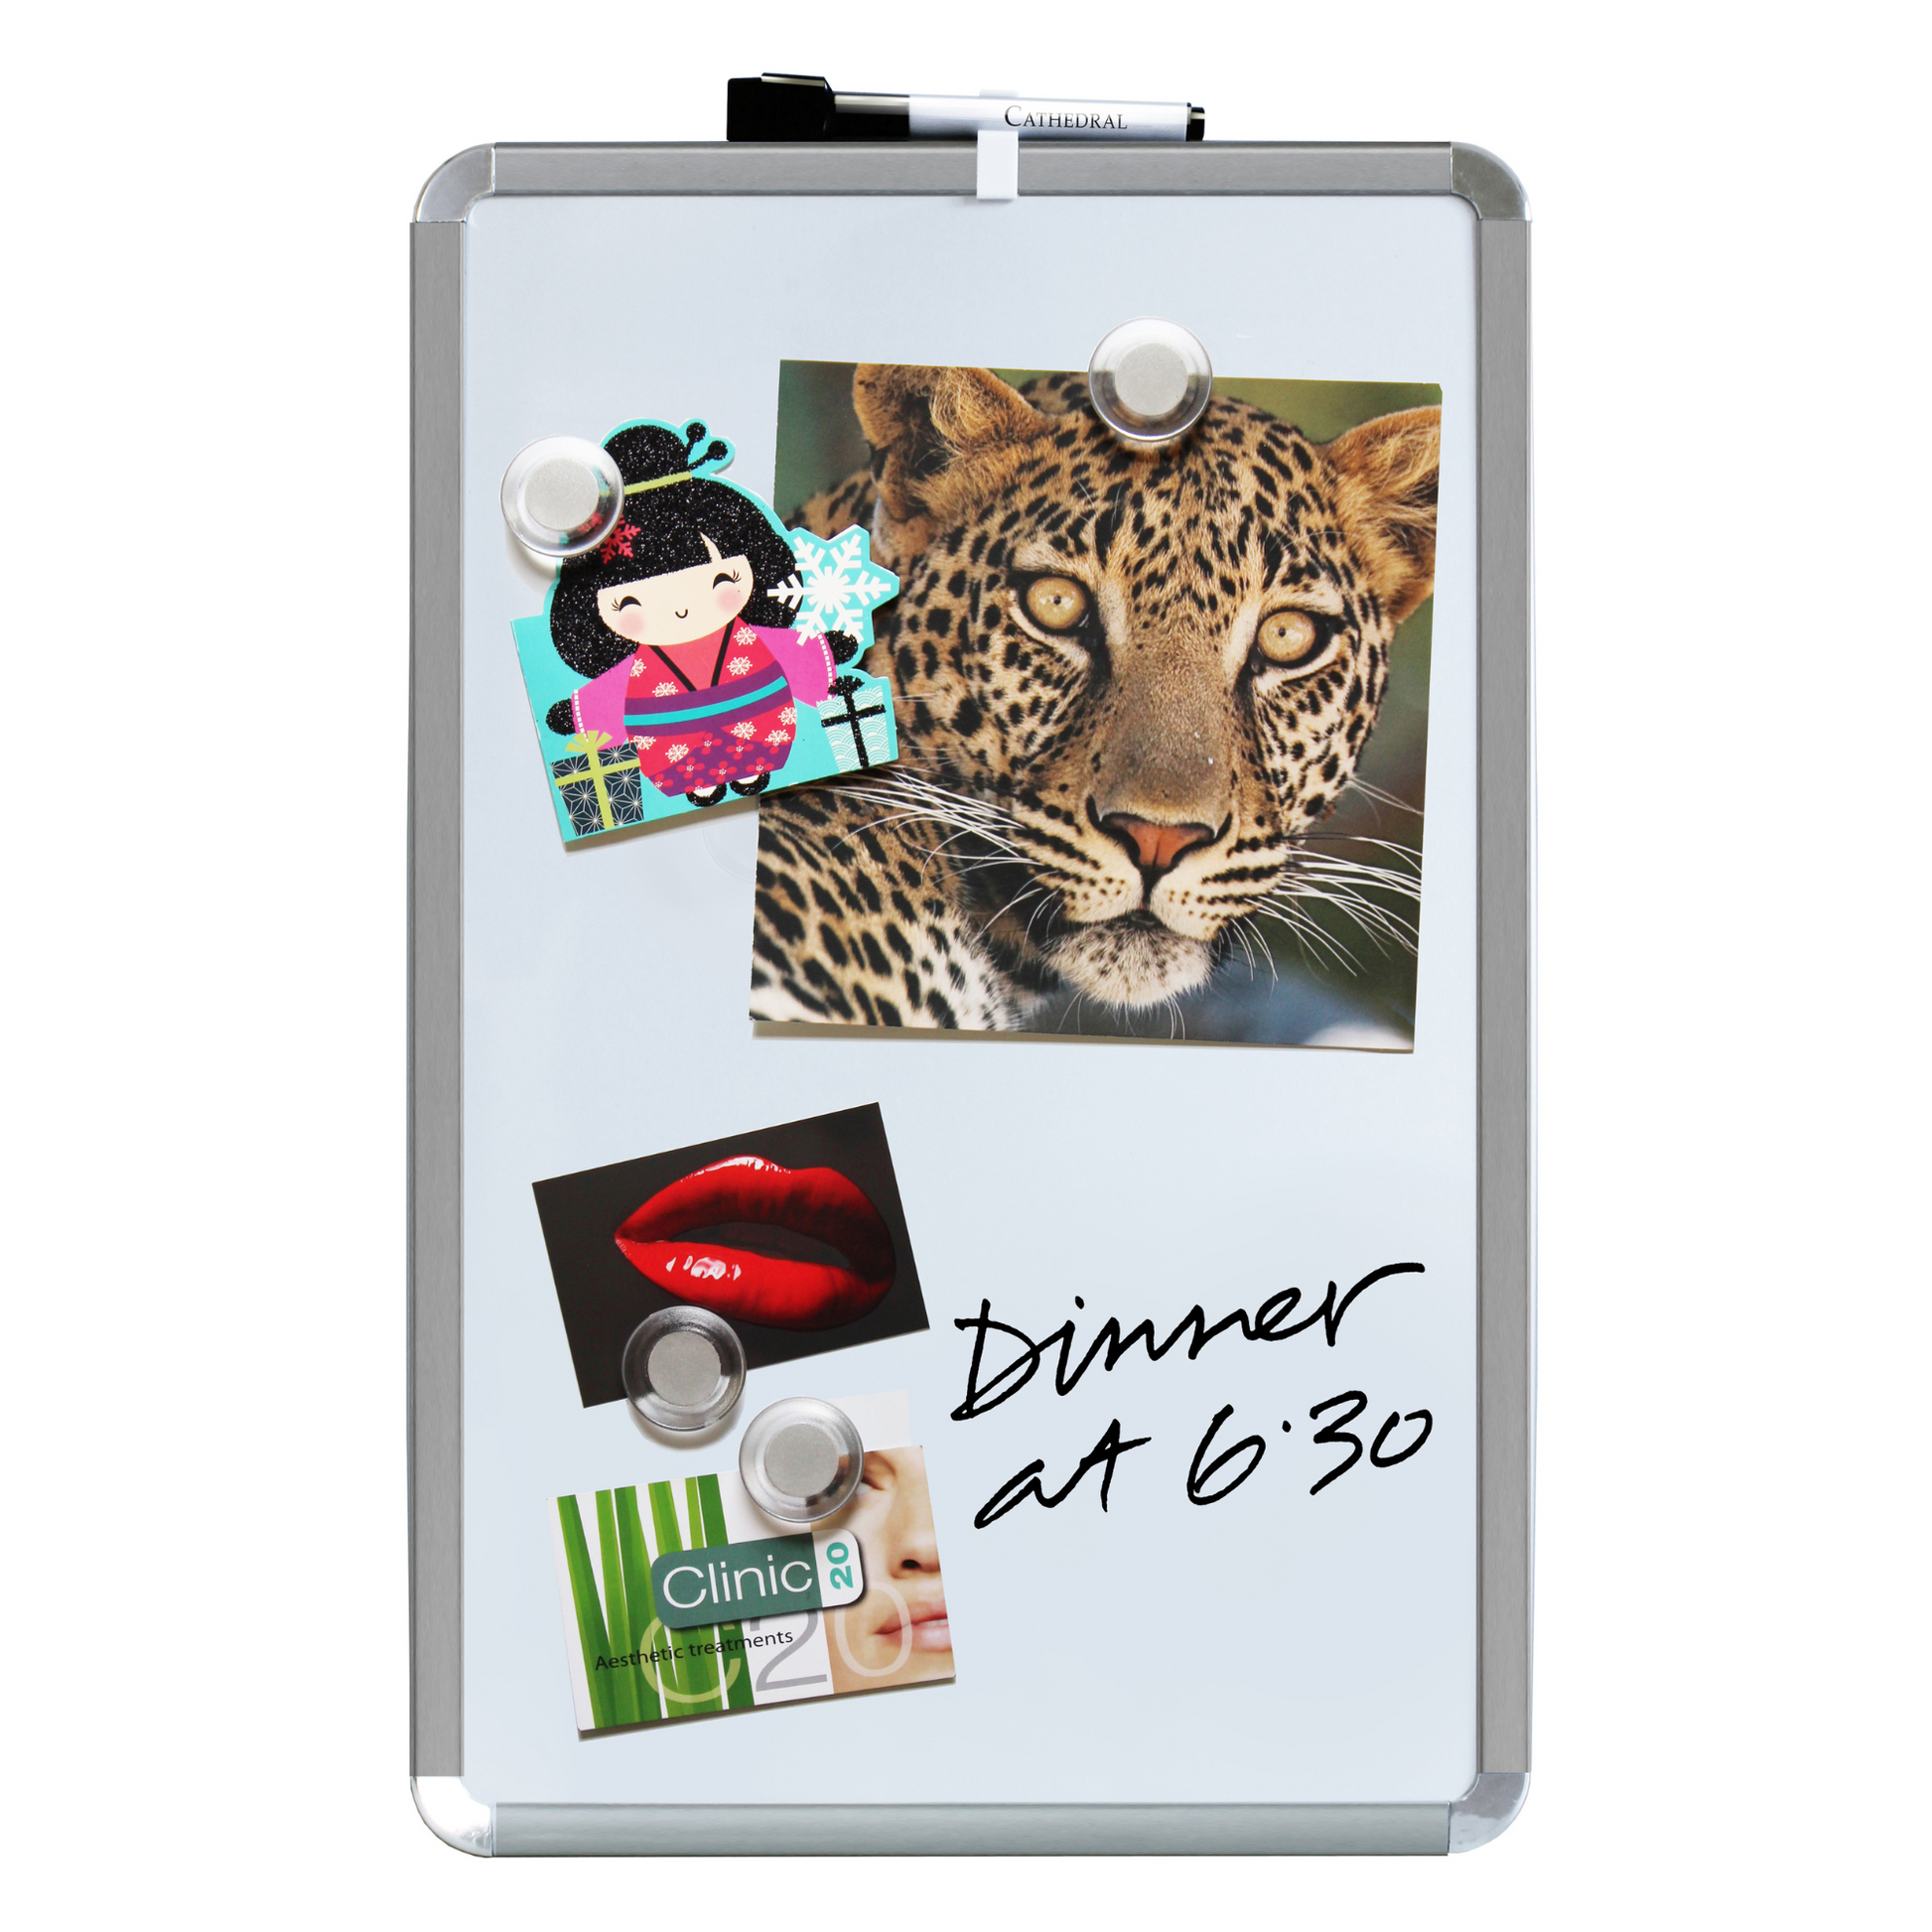 A 28x43cm dry erase board with chrome corners, displaying a vibrant mix of visuals: a postcard with a cartoon figure, a captivating leopard photo, a red lips card, and a business card for 'Clinic 20', all held by round transparent magnets. Handwritten note reads 'Dinner at 6:30', showcasing the different applications of this board, as well as it's included accessories in use.